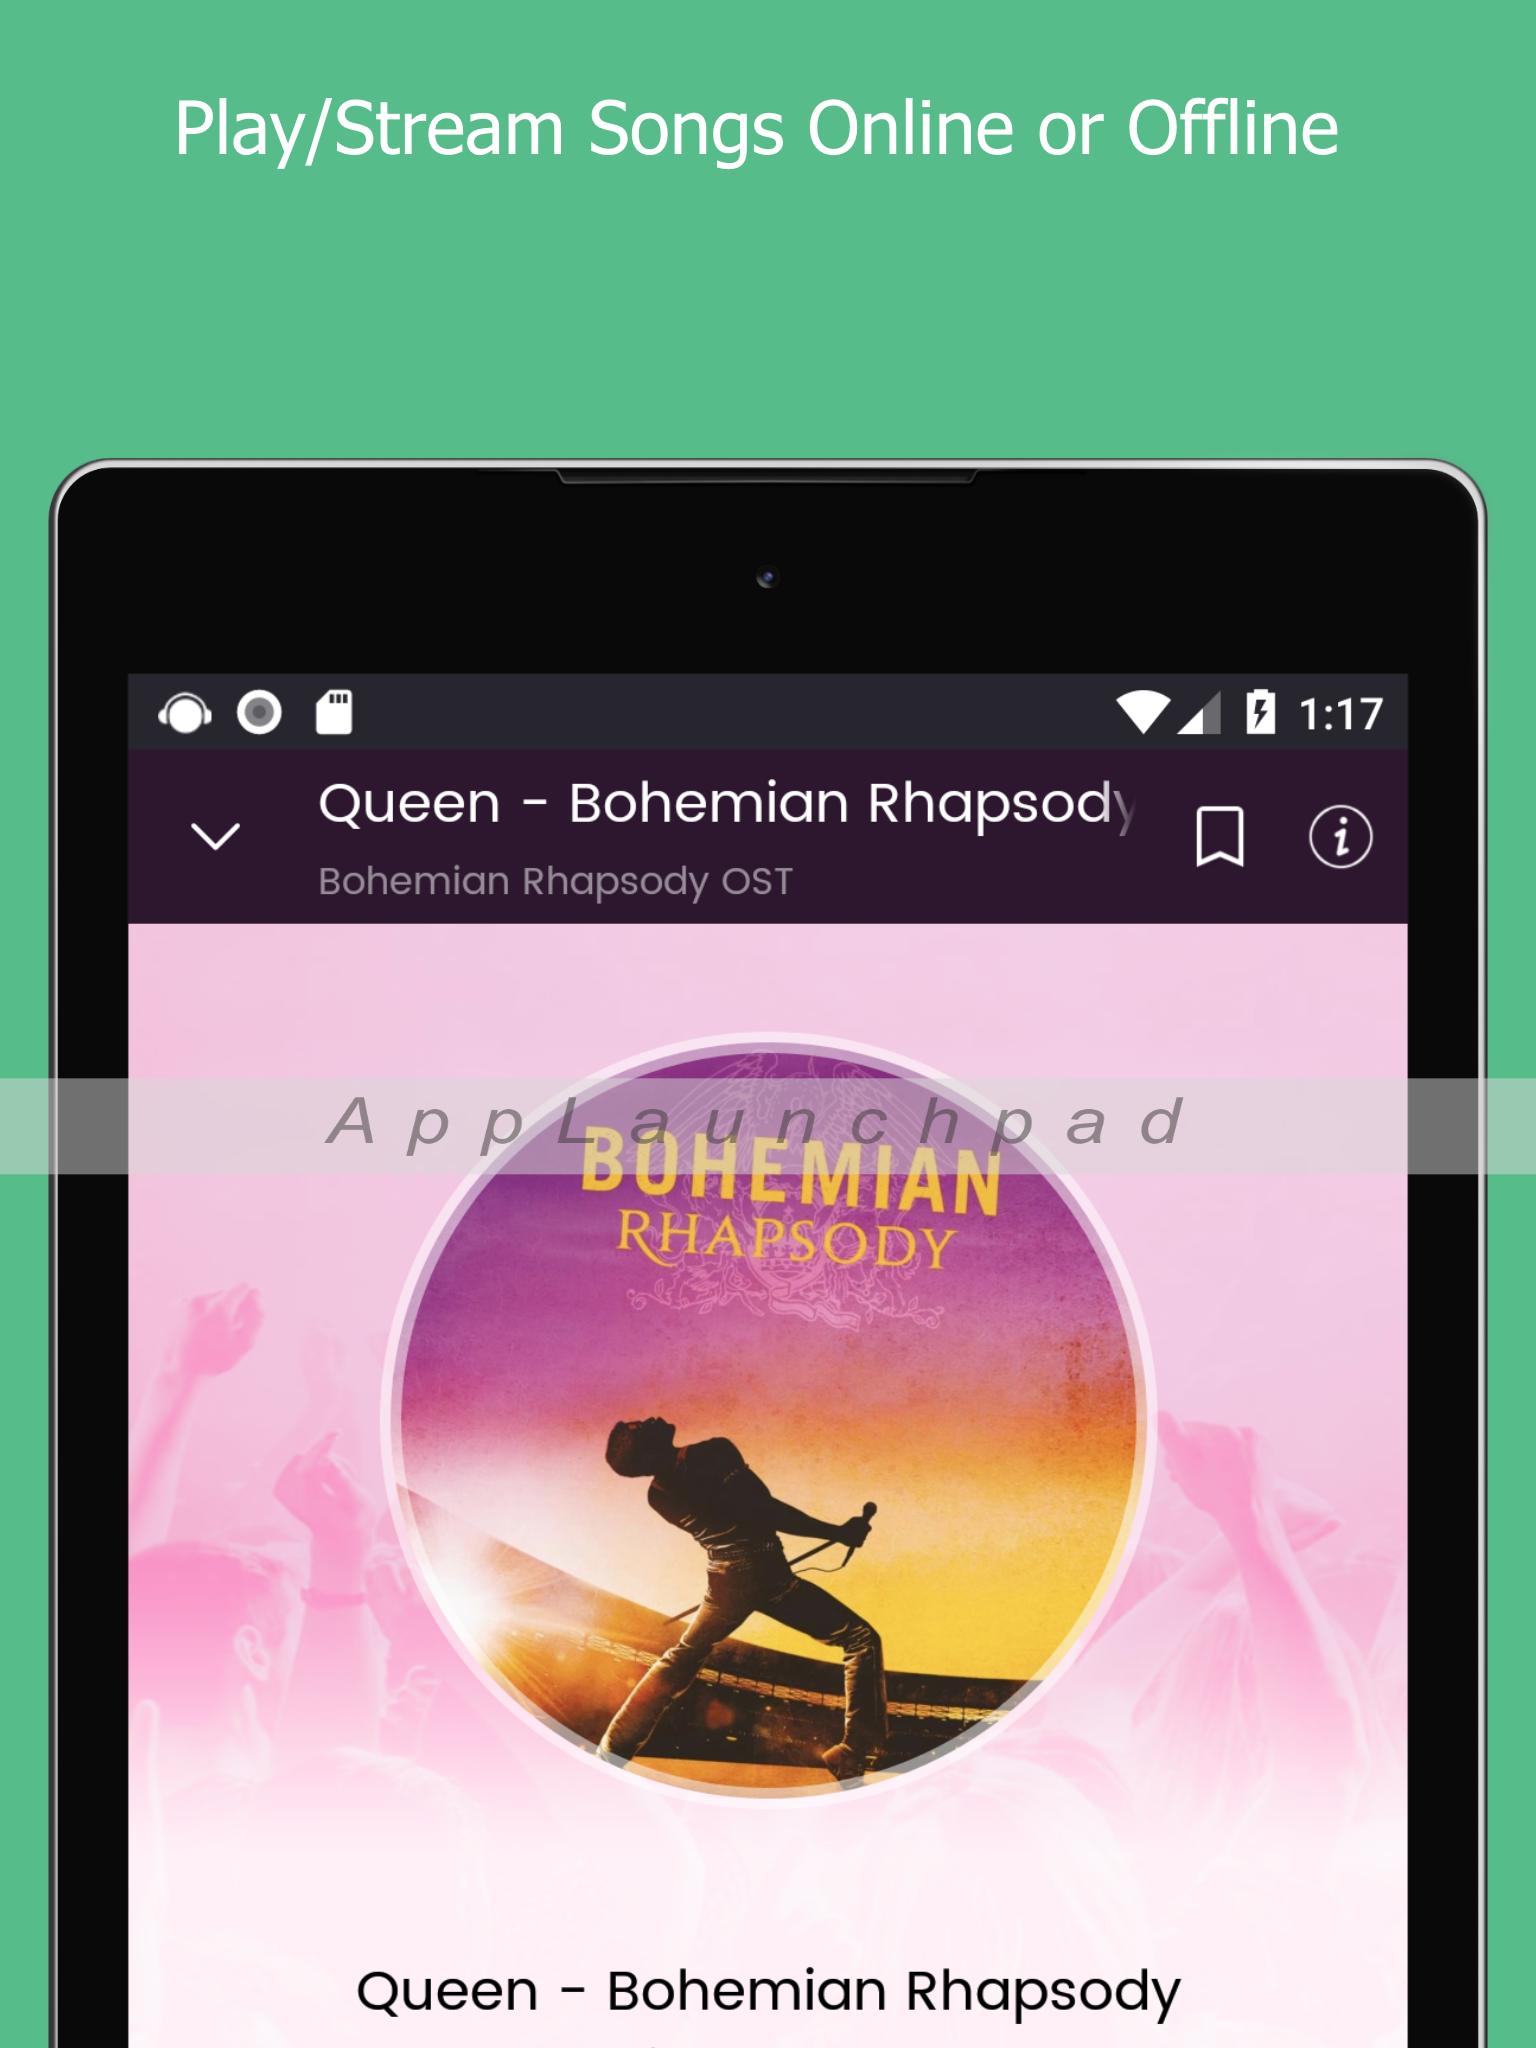 Bohemian Rhapsody OST for Android - APK Download